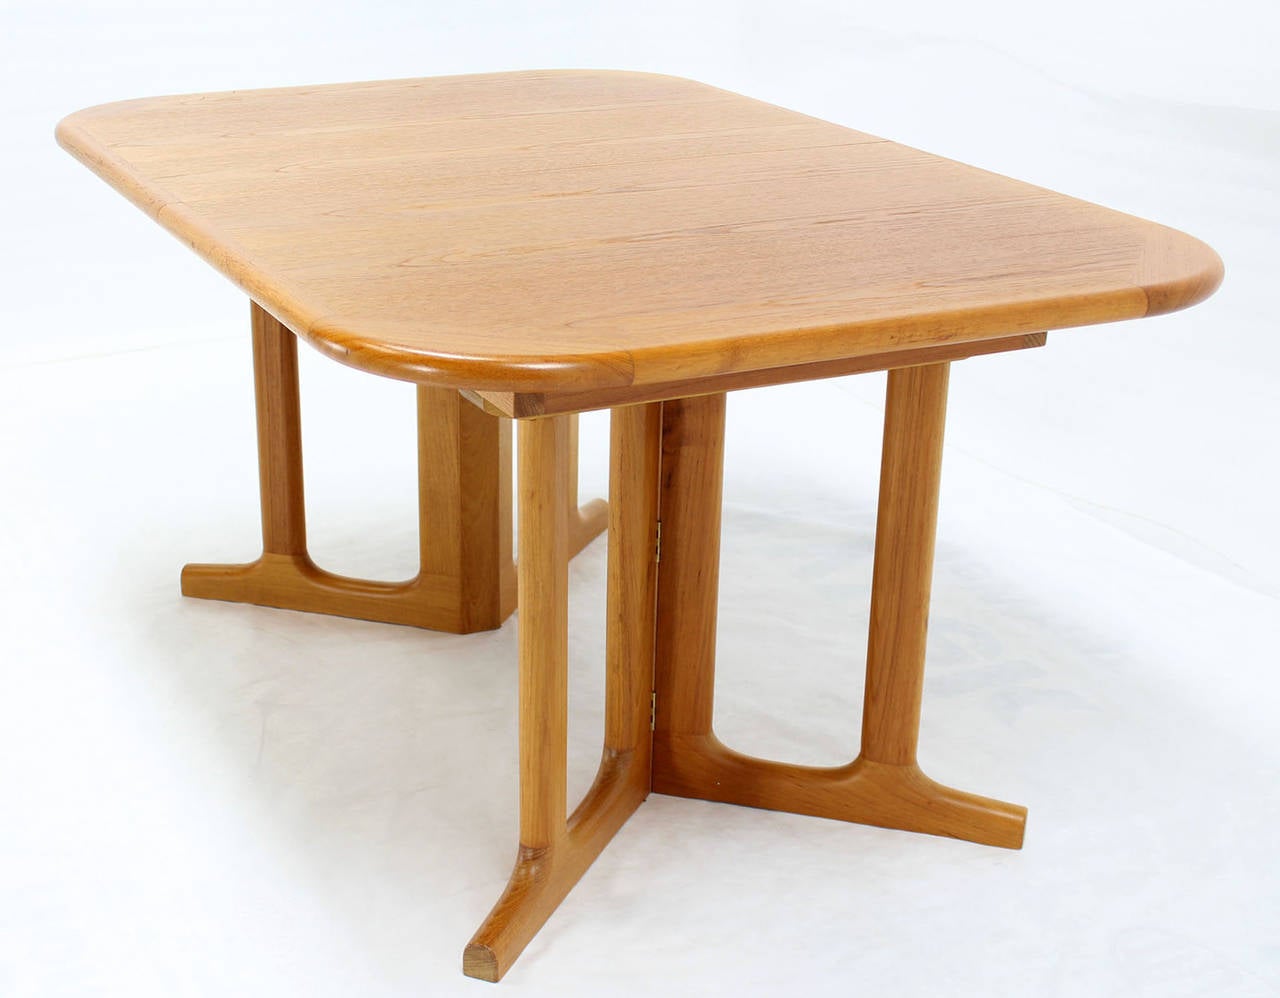 Very nice Danish modern dining table with two 2x20" leaves in excellent condition.